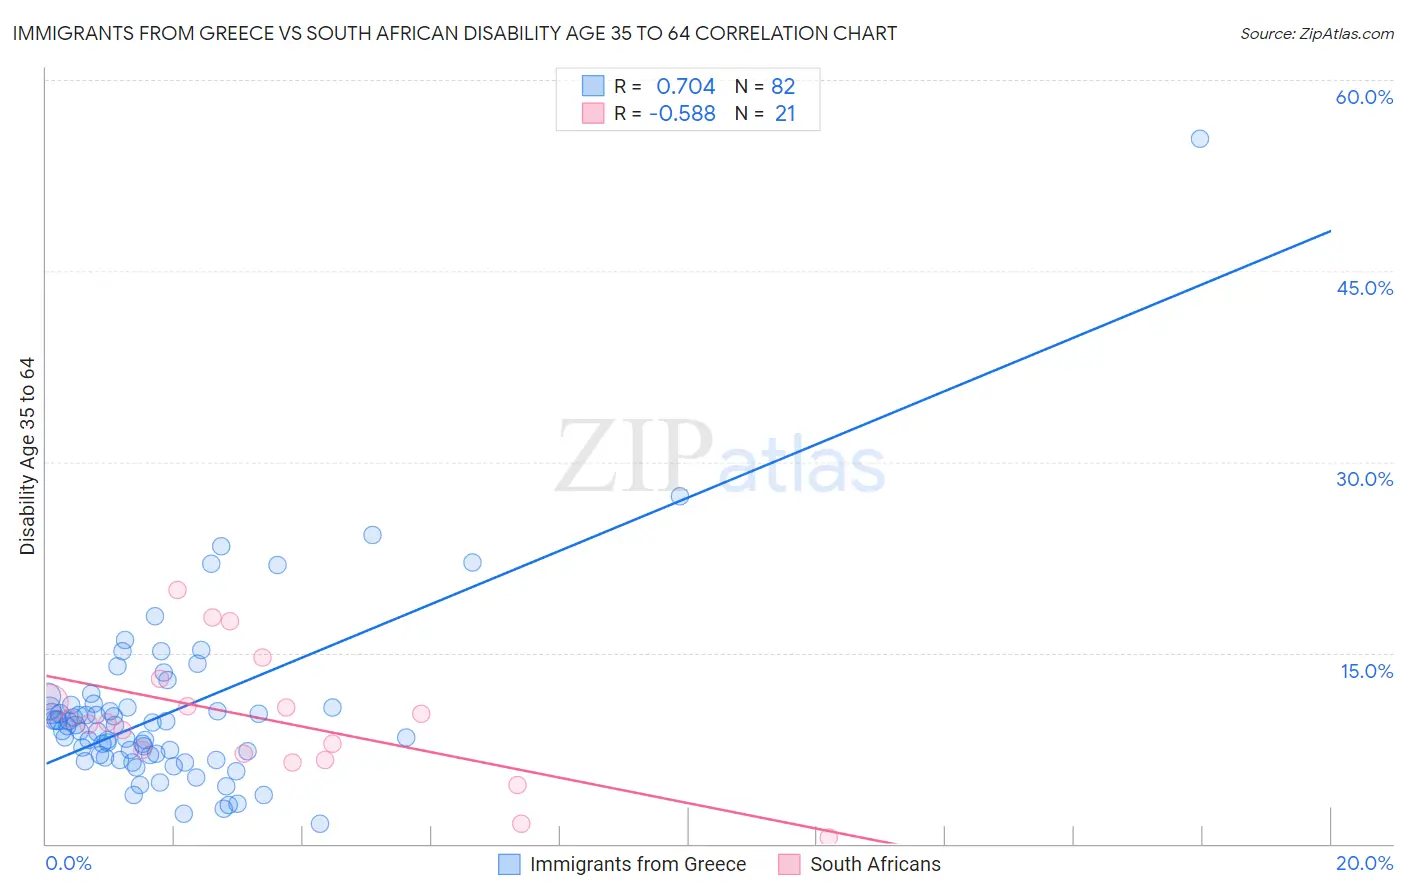 Immigrants from Greece vs South African Disability Age 35 to 64